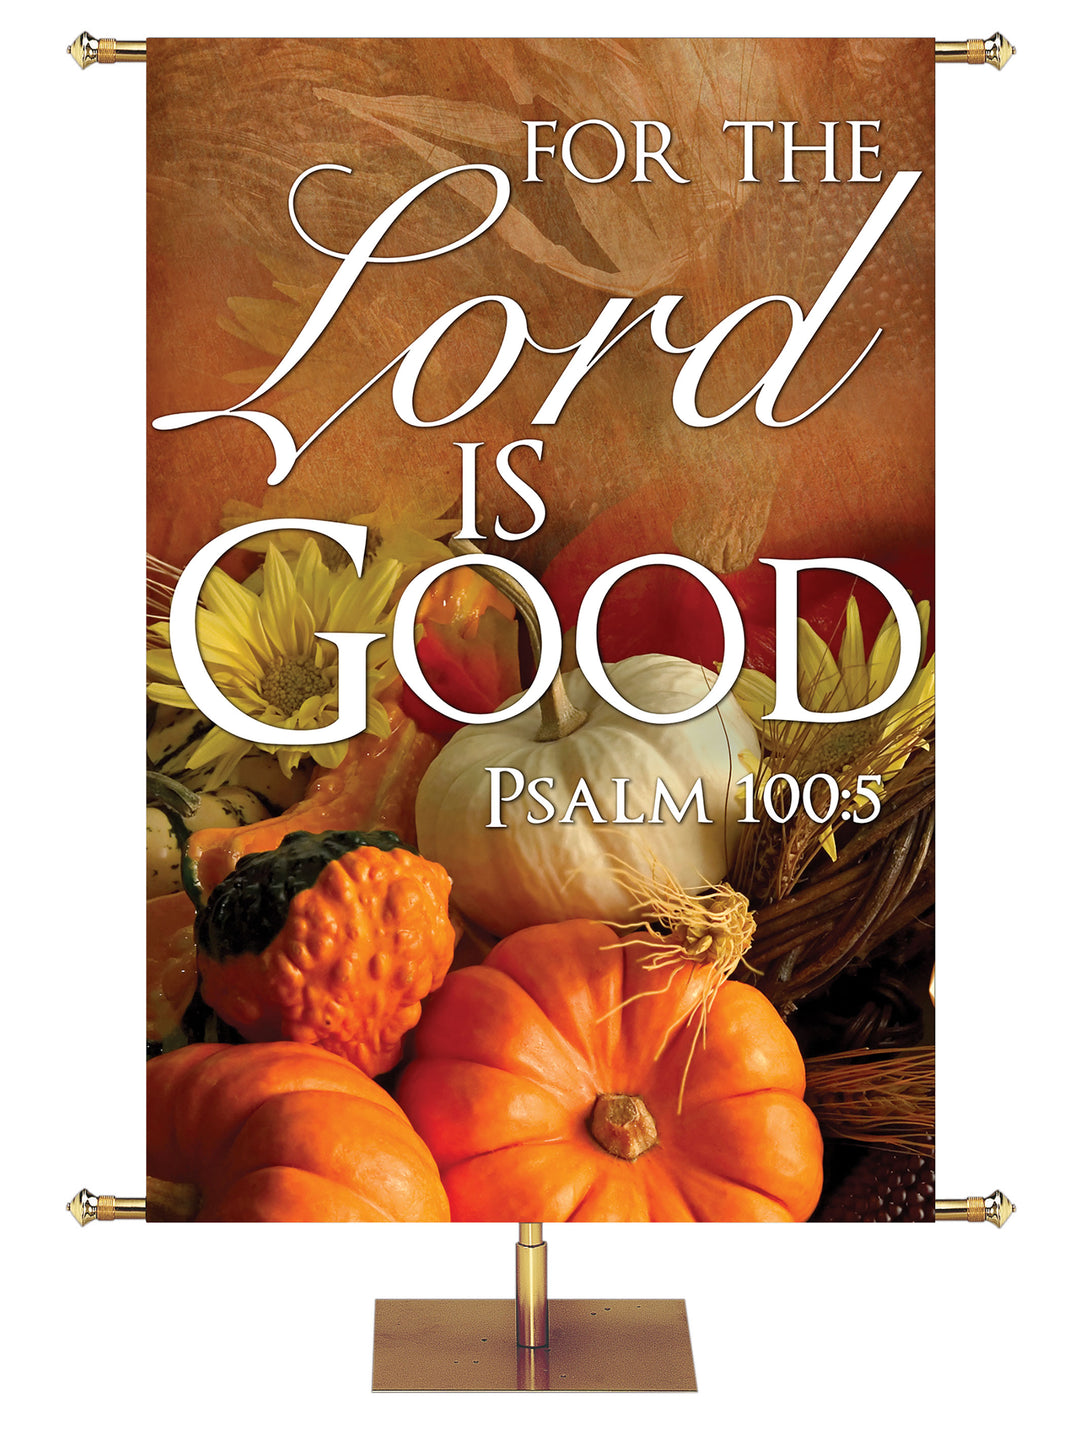 For the Lord is Good Design 3 Psalm 100:5 Church Banner for Fall and Thanksgiving with pumpkins